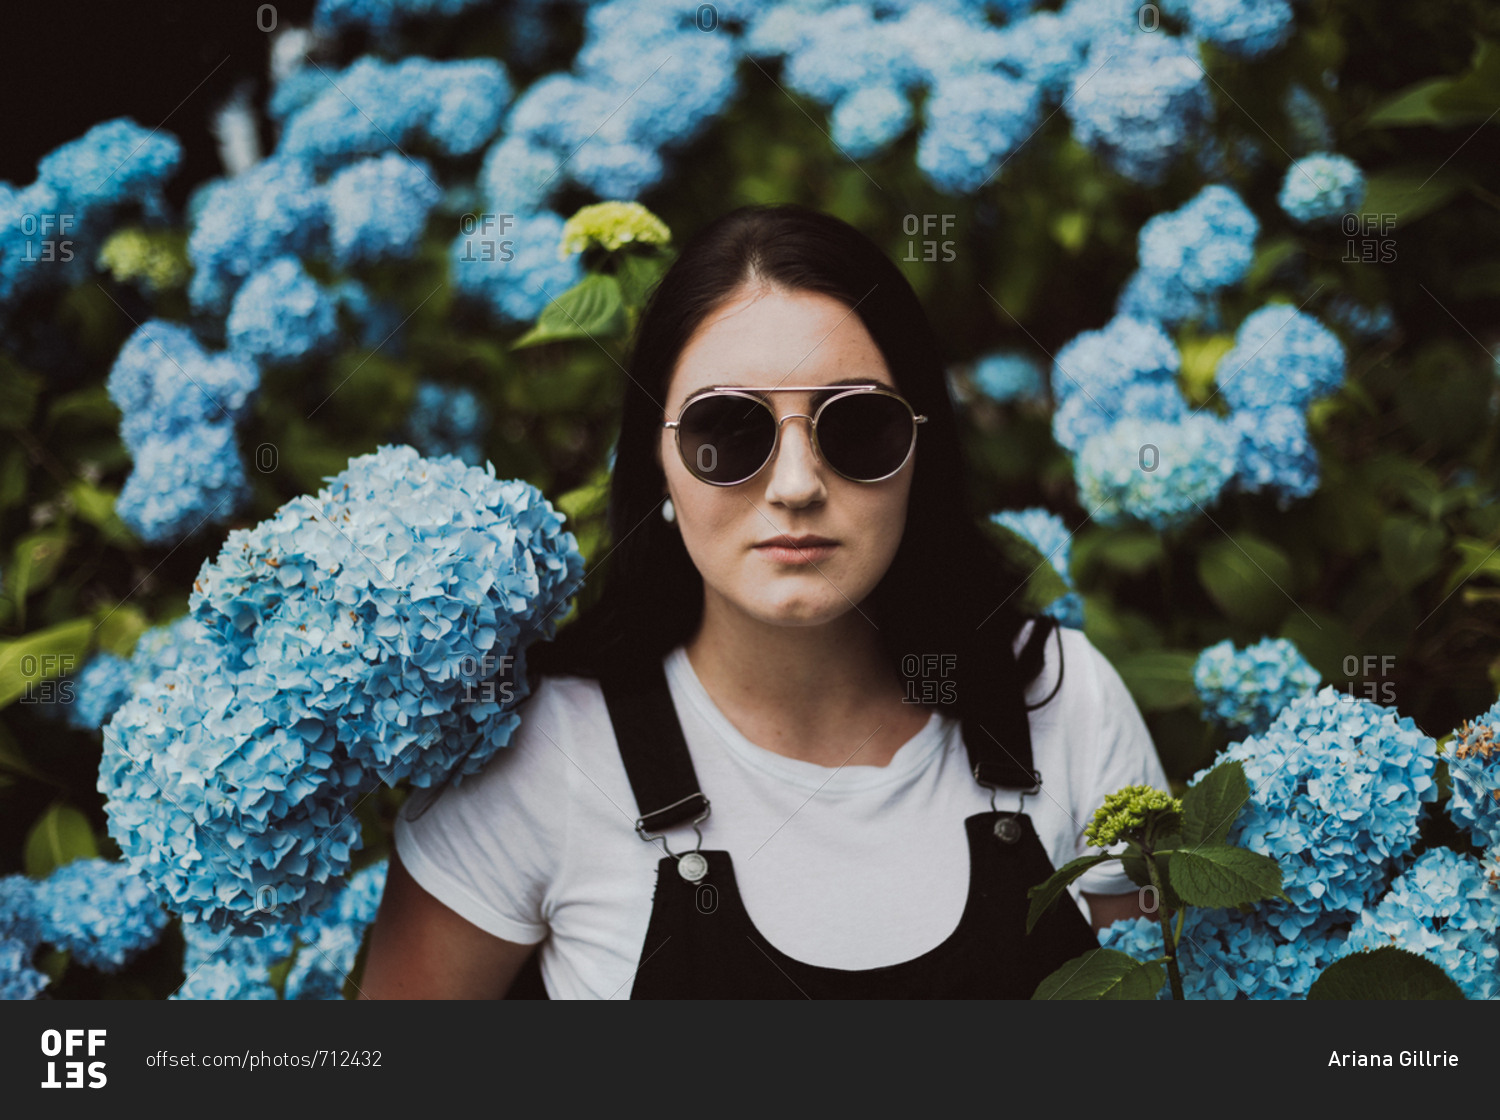 Portrait of a young woman wearing sunglasses standing among blooming hydrangeas